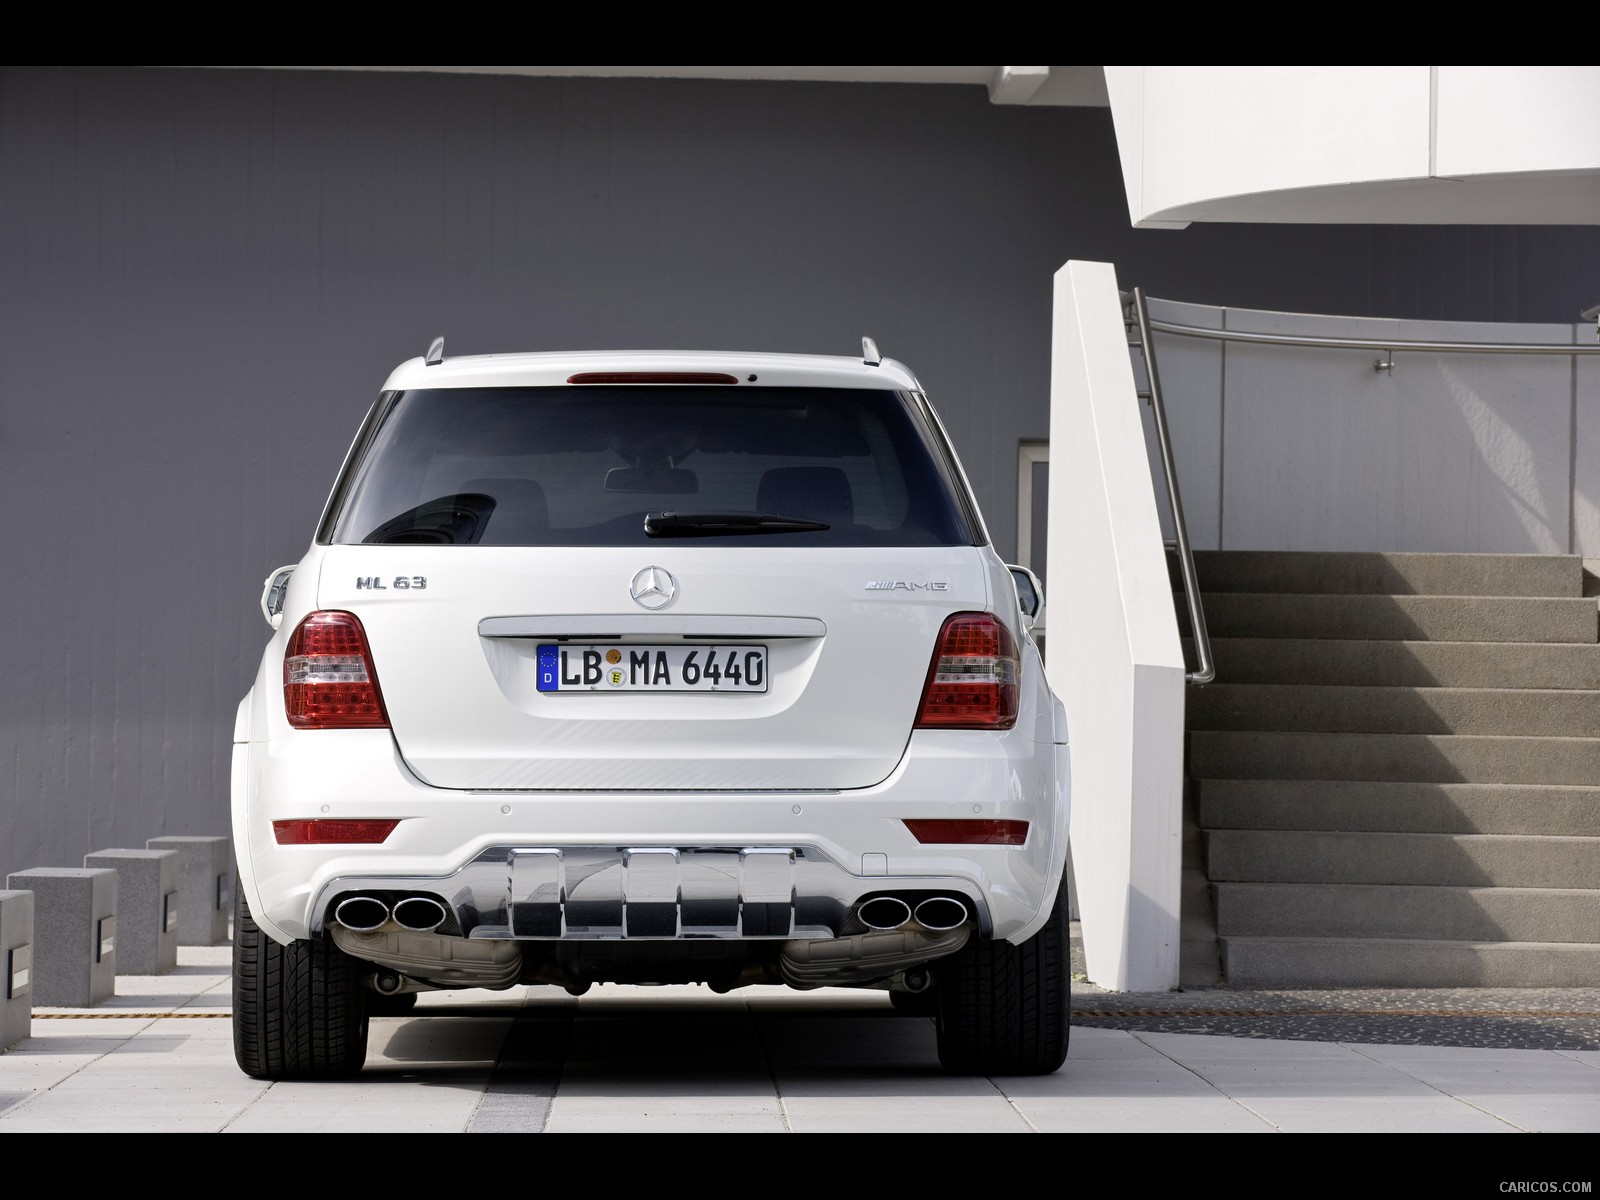 Mercedes-Benz ML 63 AMG  - Rear Angle , #4 of 7